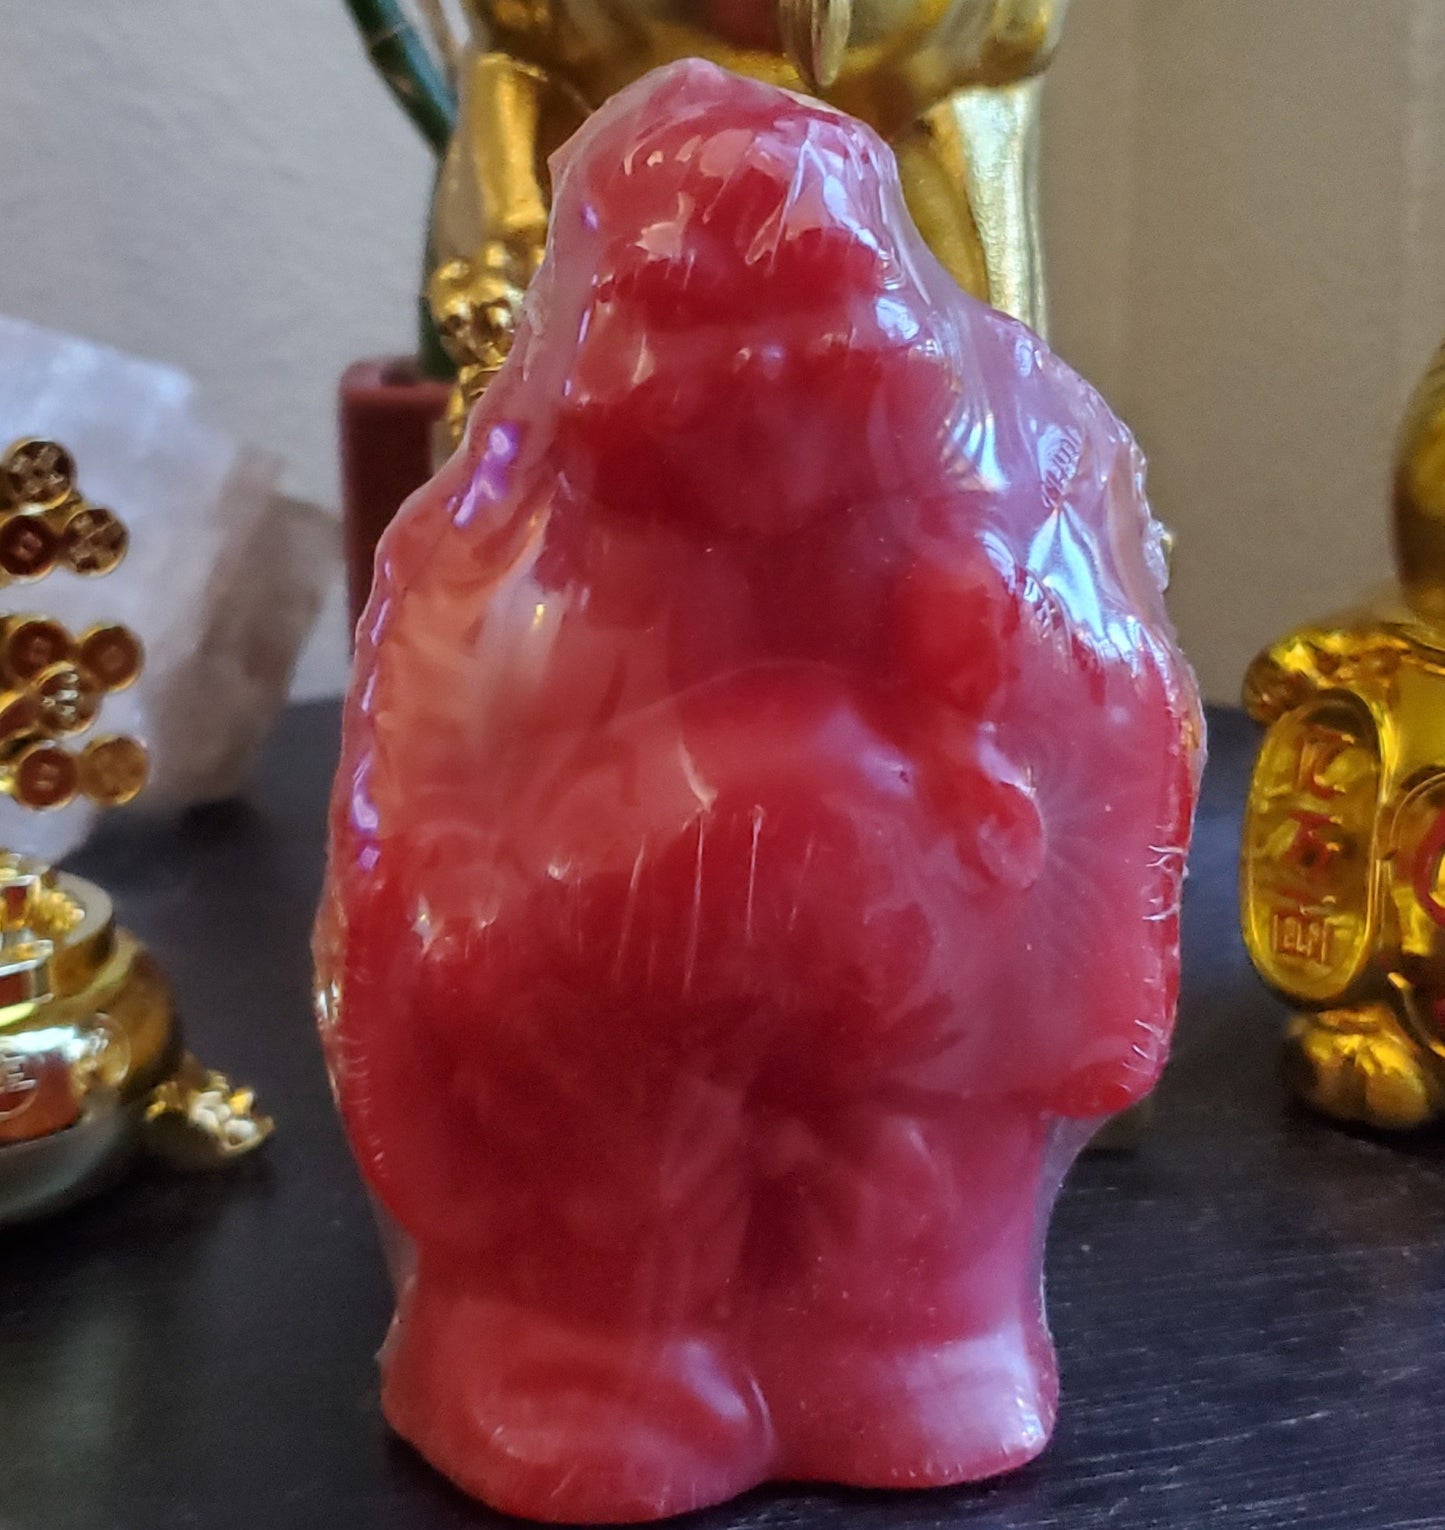 5.75 In Tall Red Lucky Buddha Candle #CandleMagick #AltarWork #LuckyBuddha